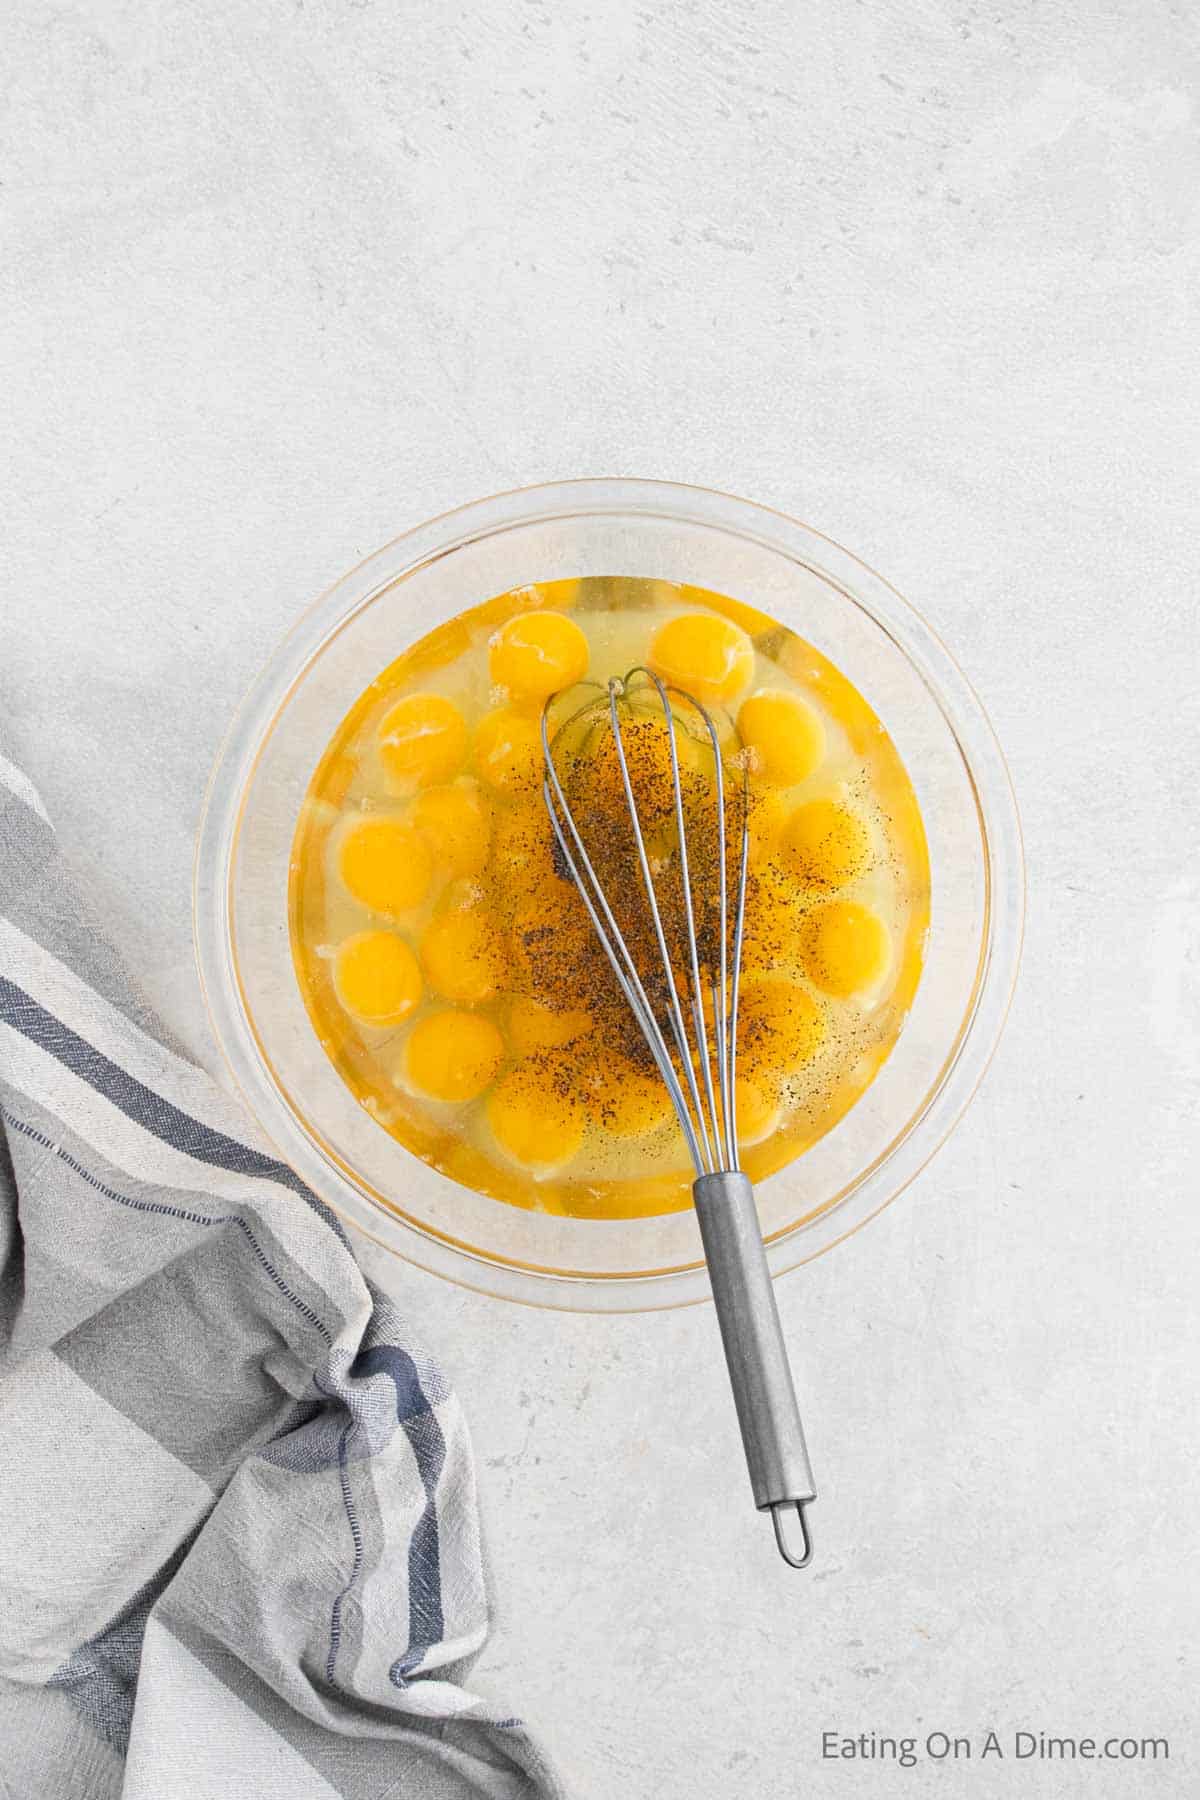 Whisking the eggs together in a bowl